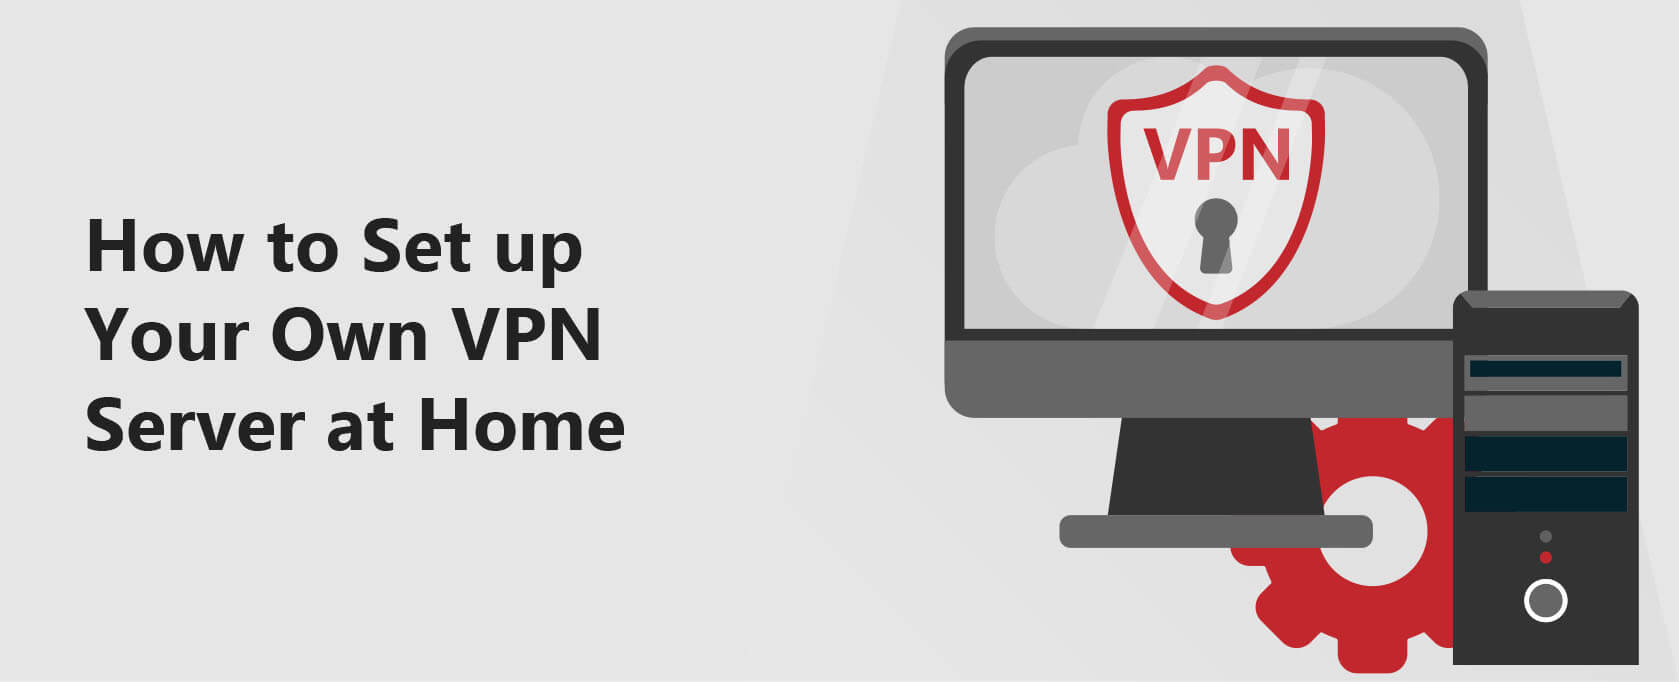 how to set up your own vpn server